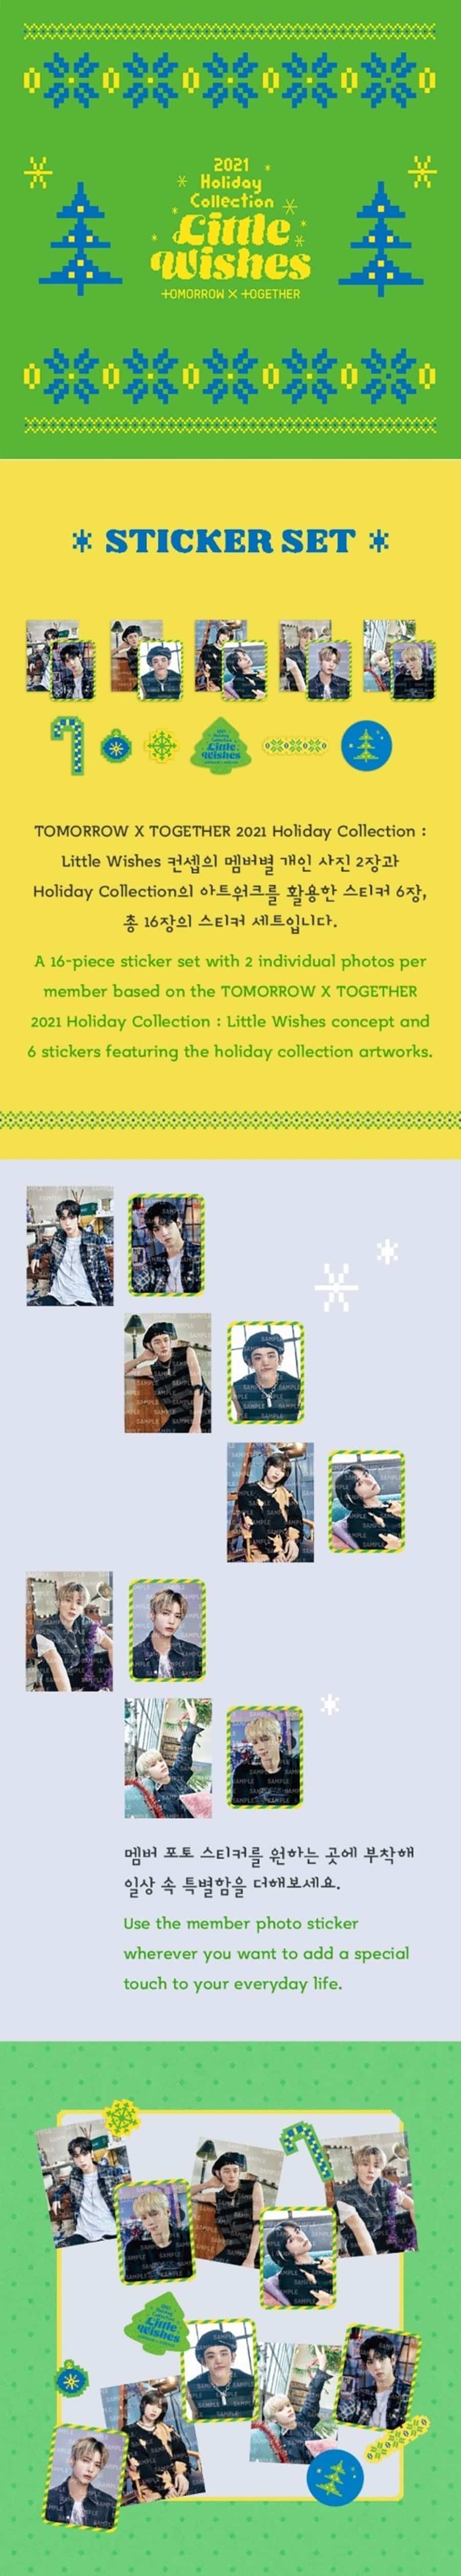 txt-2021-holiday-collection-little-wishes-sticker-set-wholesales